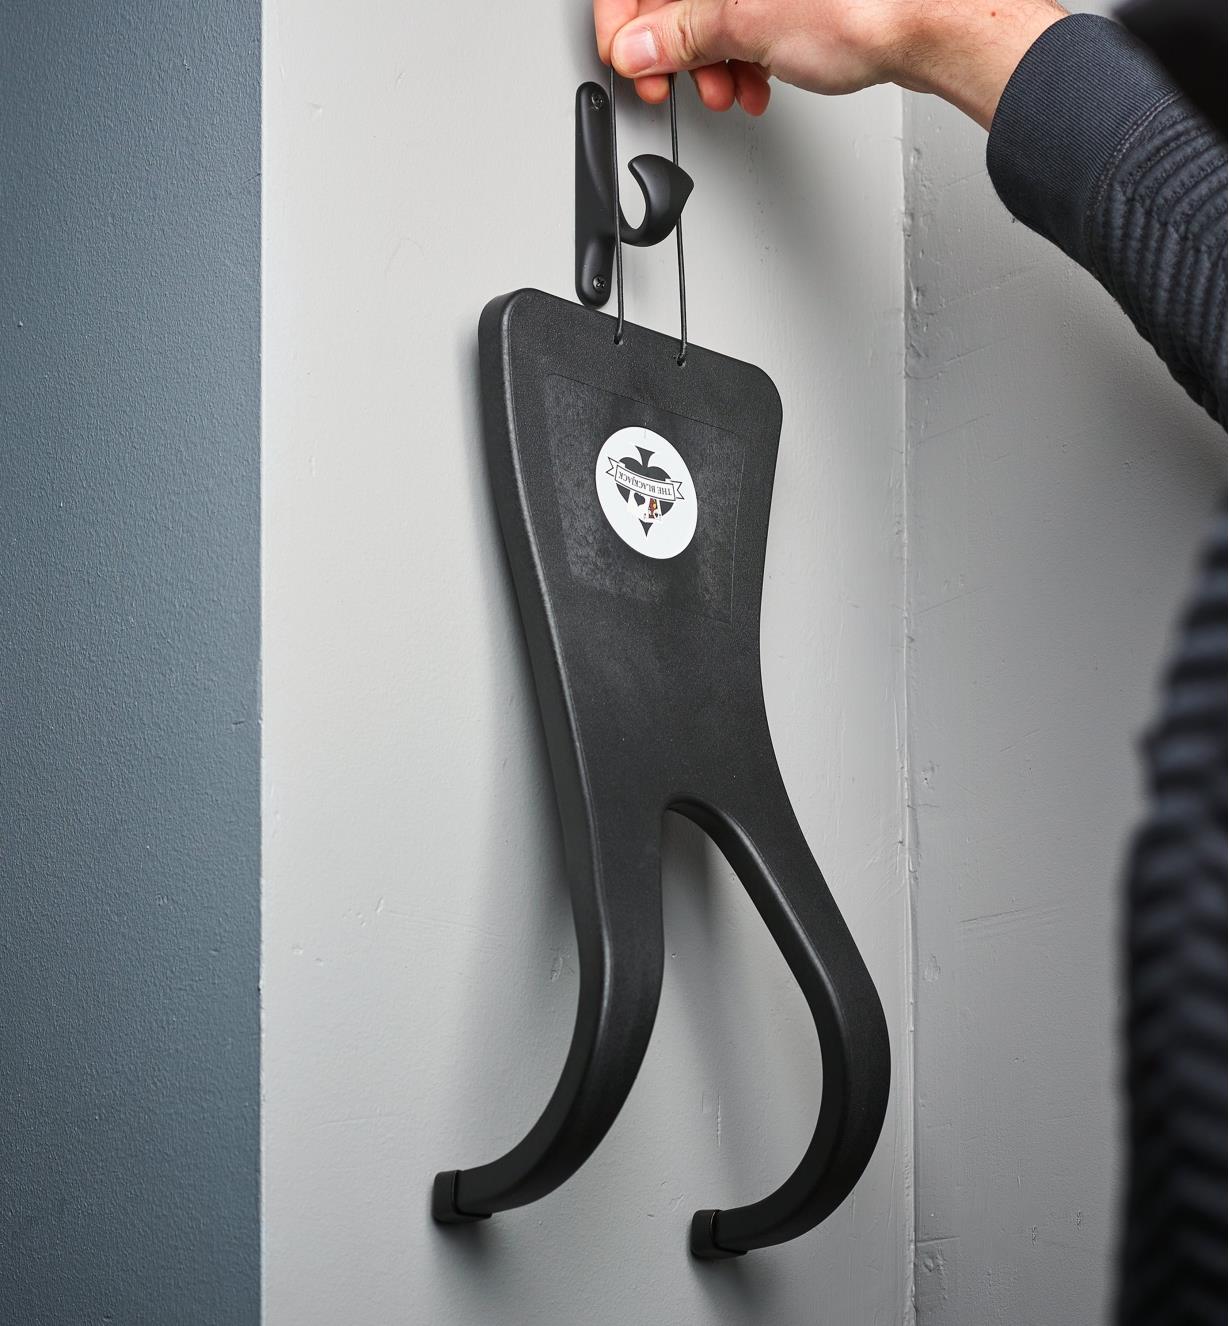 Hanging a black jack boot jack from a wall hook